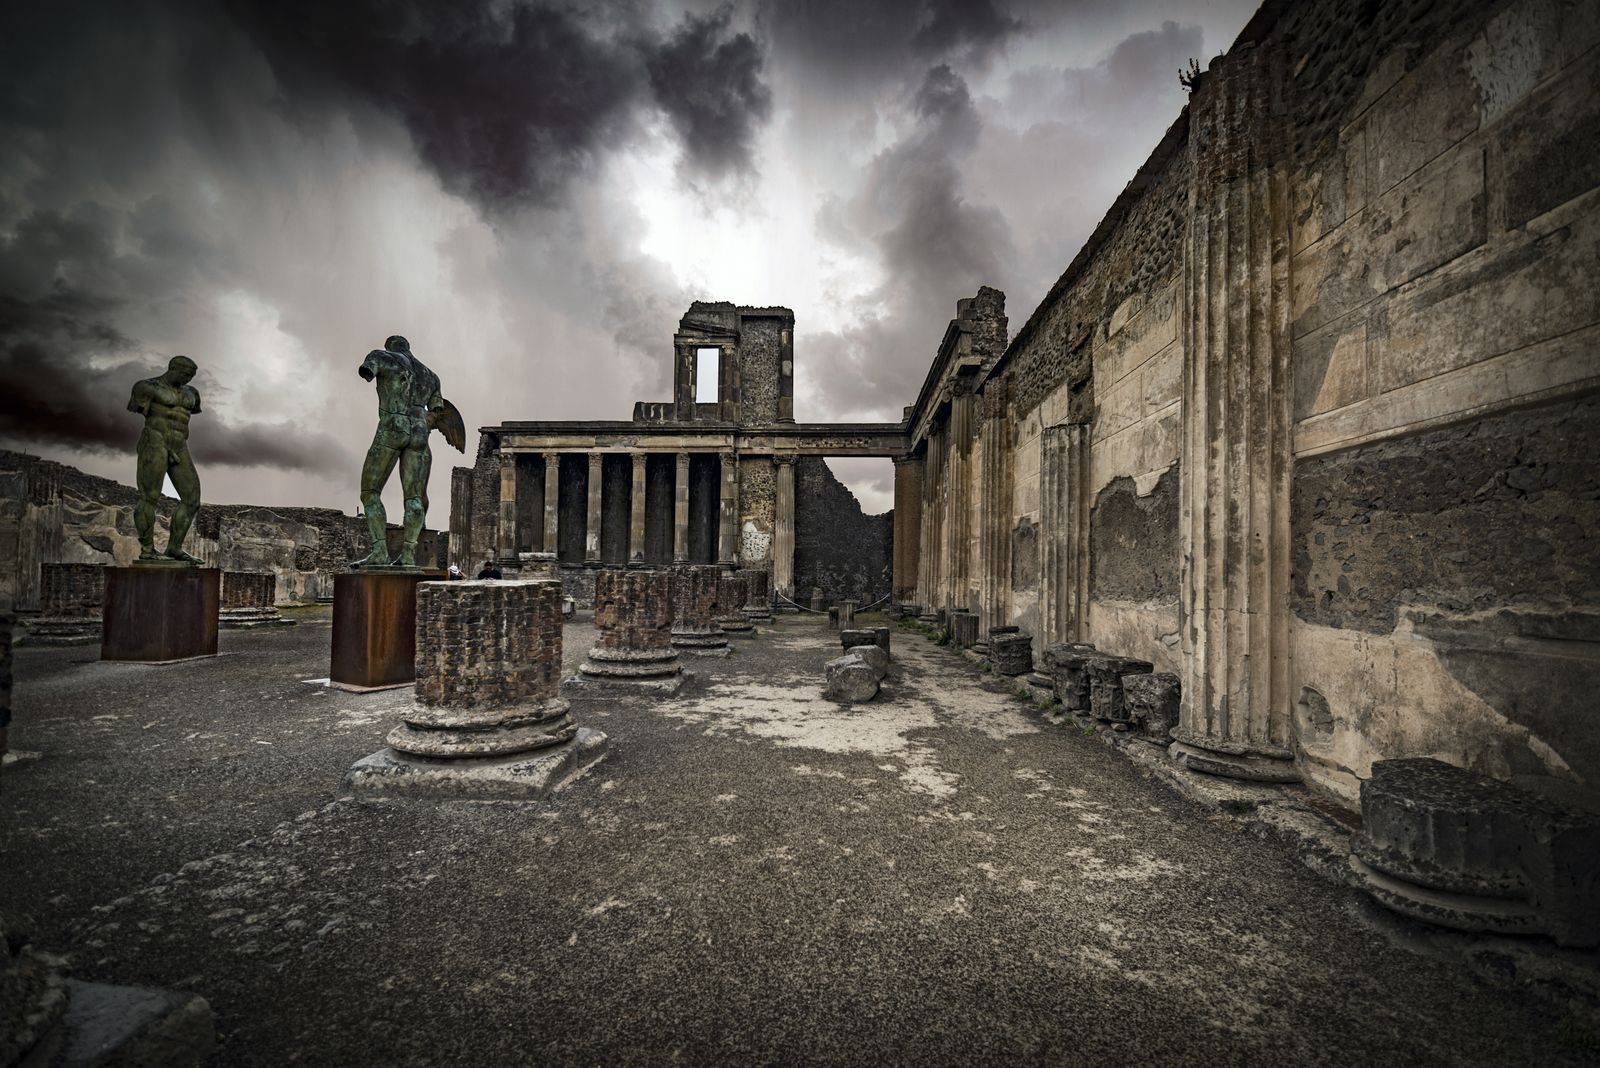 This Man Was Encased in Volcanic Ash in Pompeii. Here’s What His DNA Reveals | Smart News